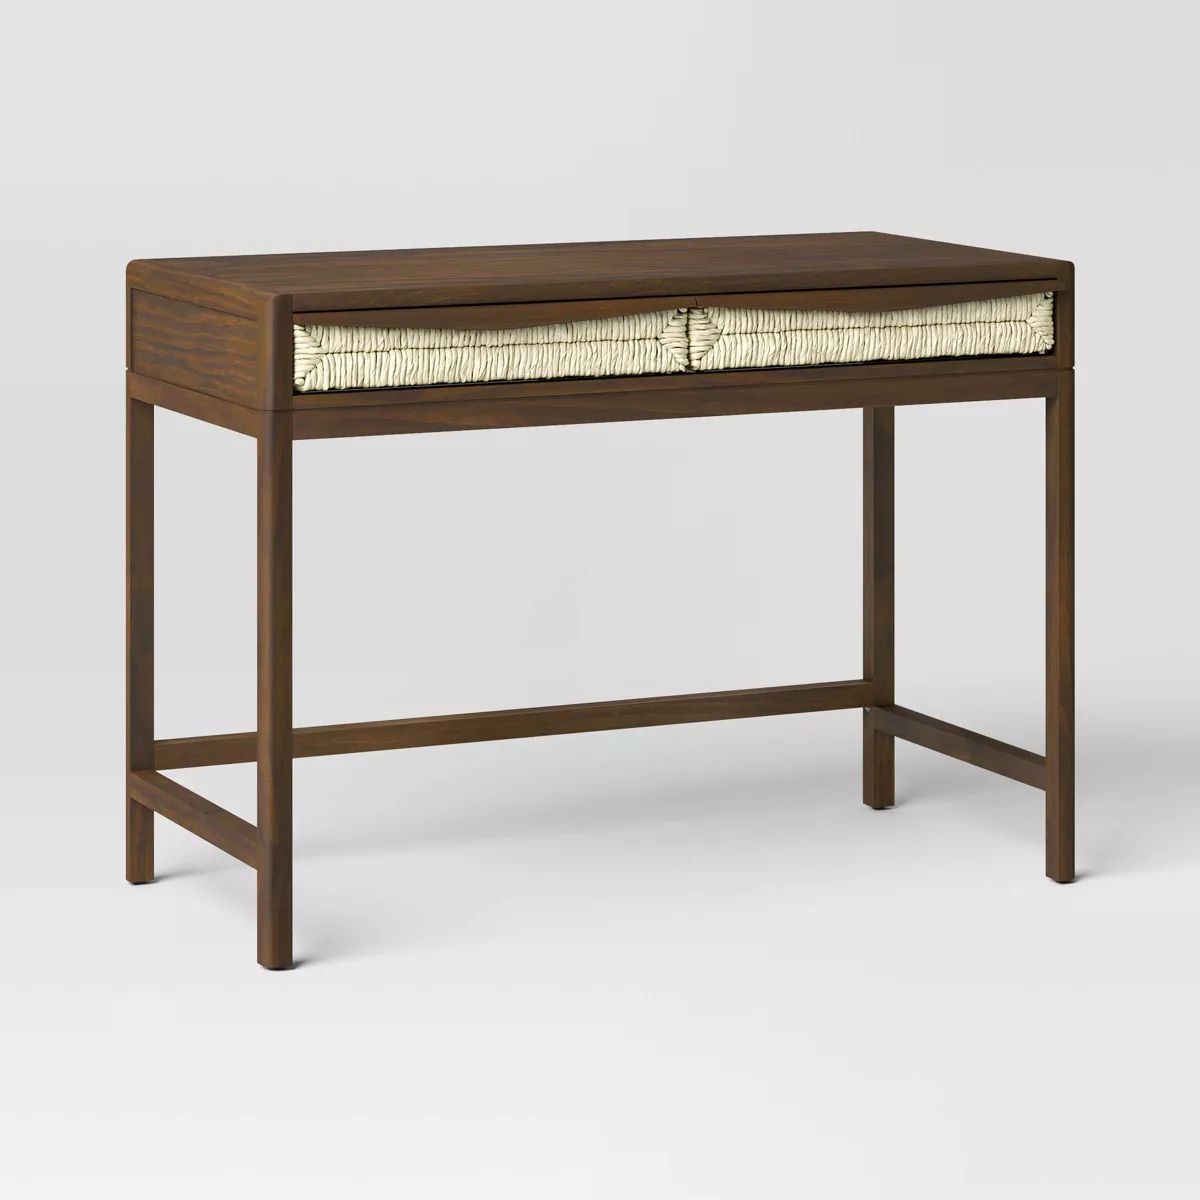 Withania Desk with Drawers - Threshold™ | Target